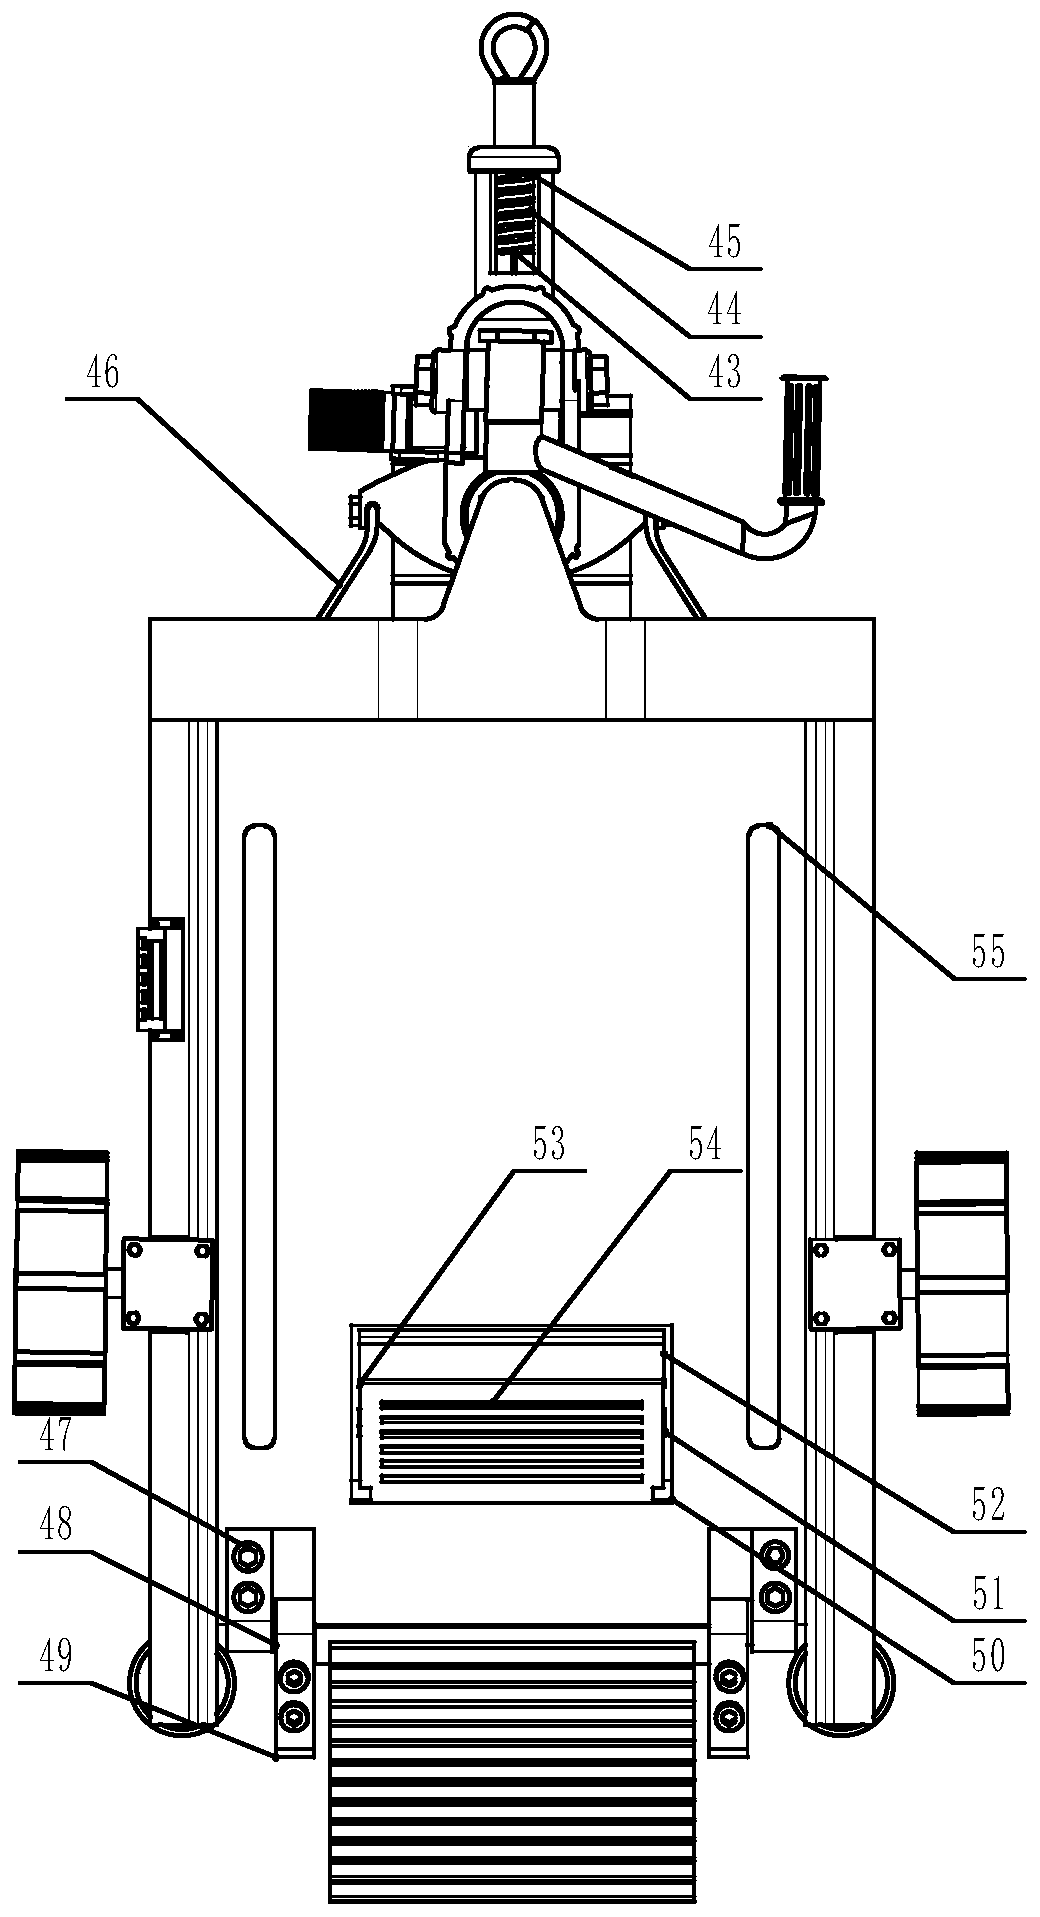 A trailer device for UAV traction